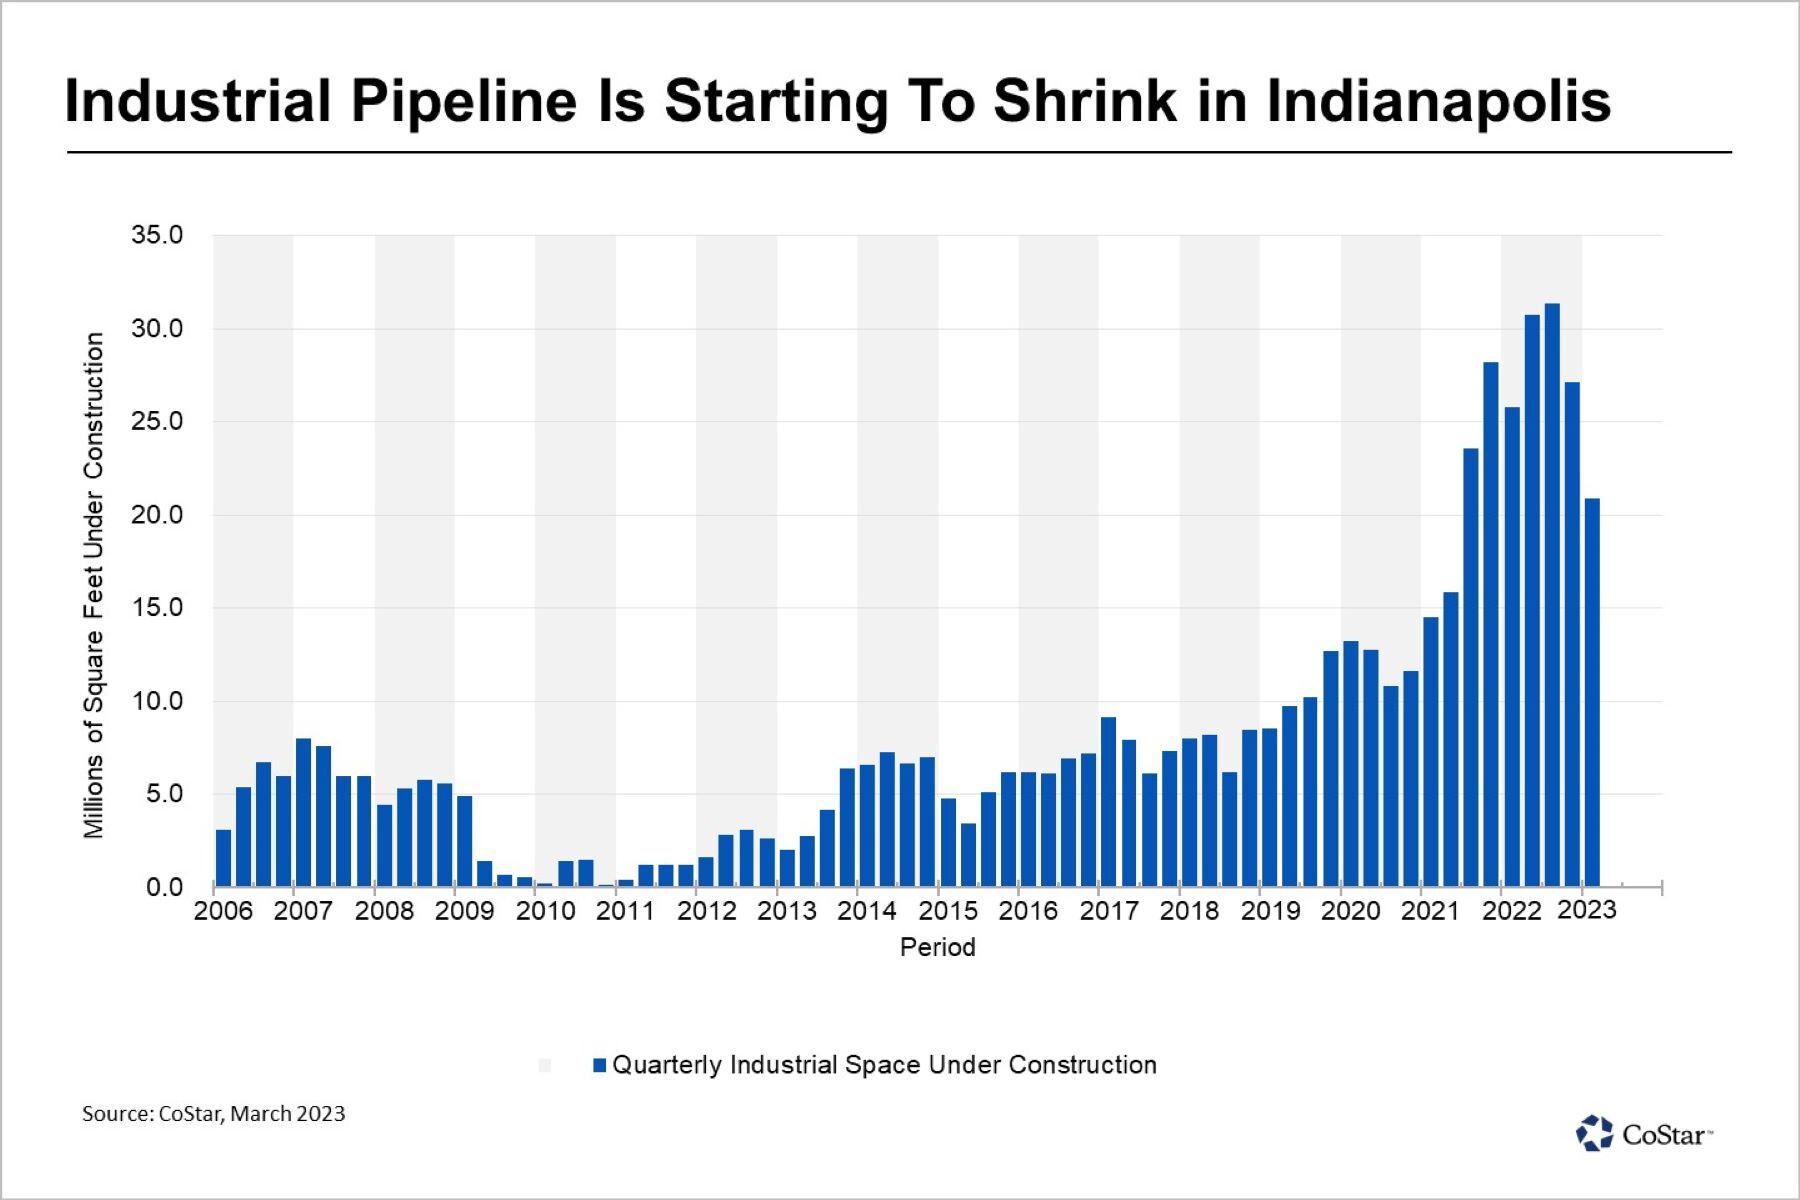 Shrinking Industrial Pipeline Spells Relief in Indianapolis